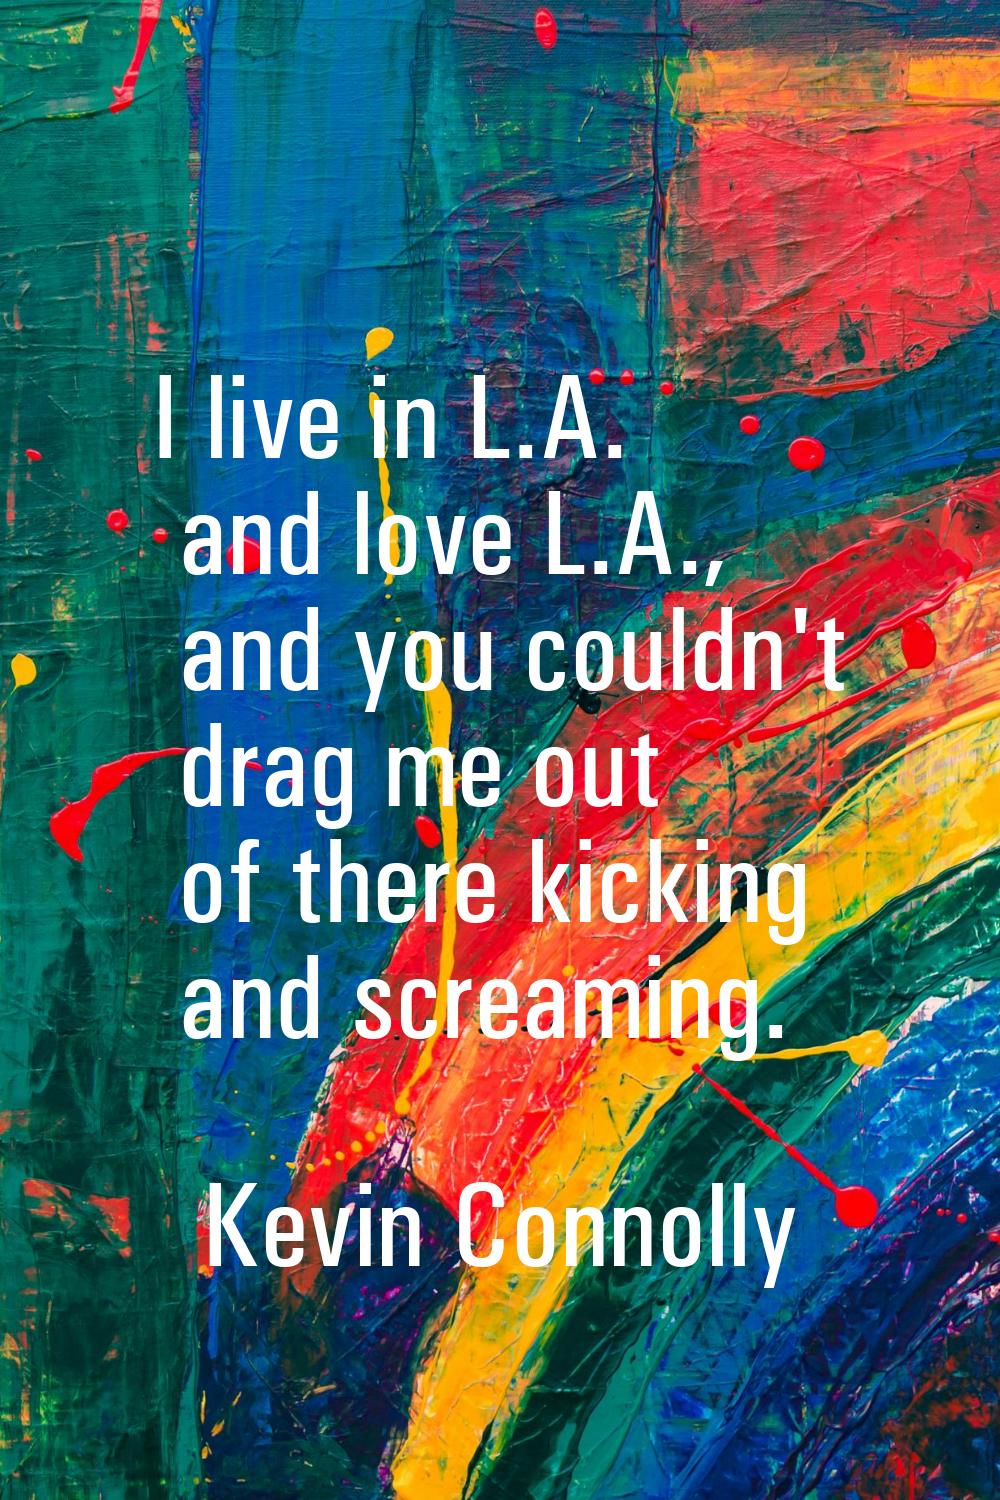 I live in L.A. and love L.A., and you couldn't drag me out of there kicking and screaming.